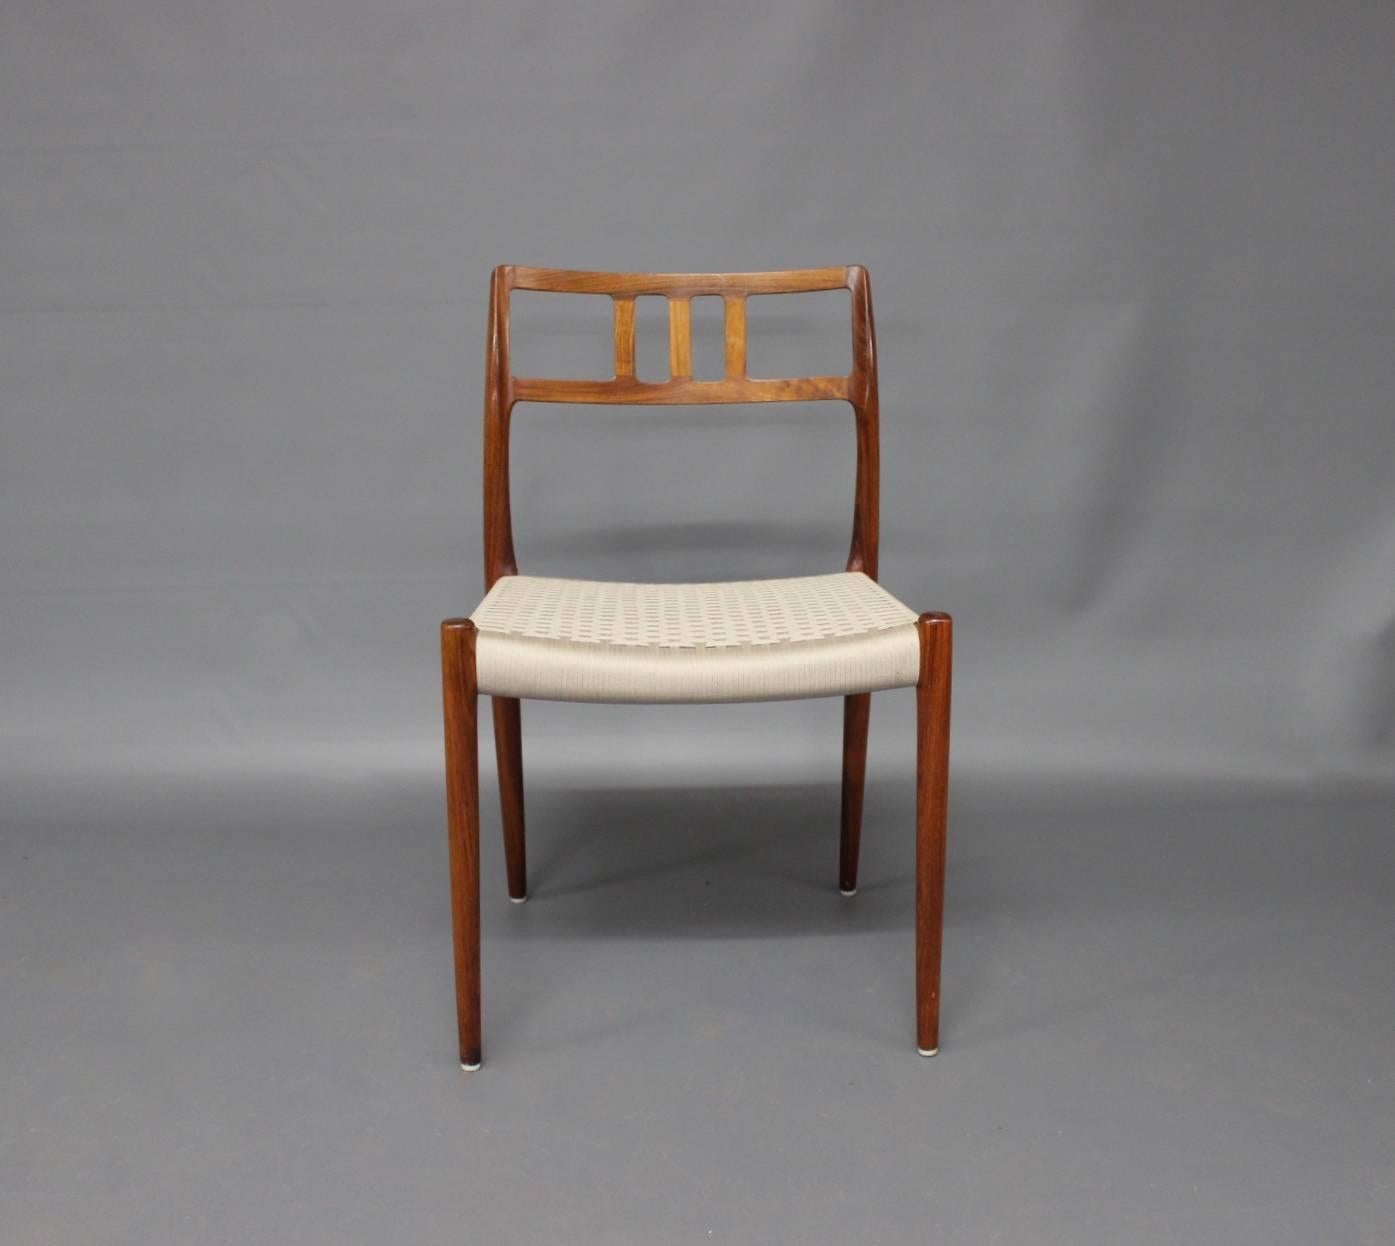 A set of six dining room chairs, model 79, designed by N.O. Moeller in 1966 and manufactured by J.L. Moeller in the late 1960s. The chairs are made of rosewood and light grey seats.